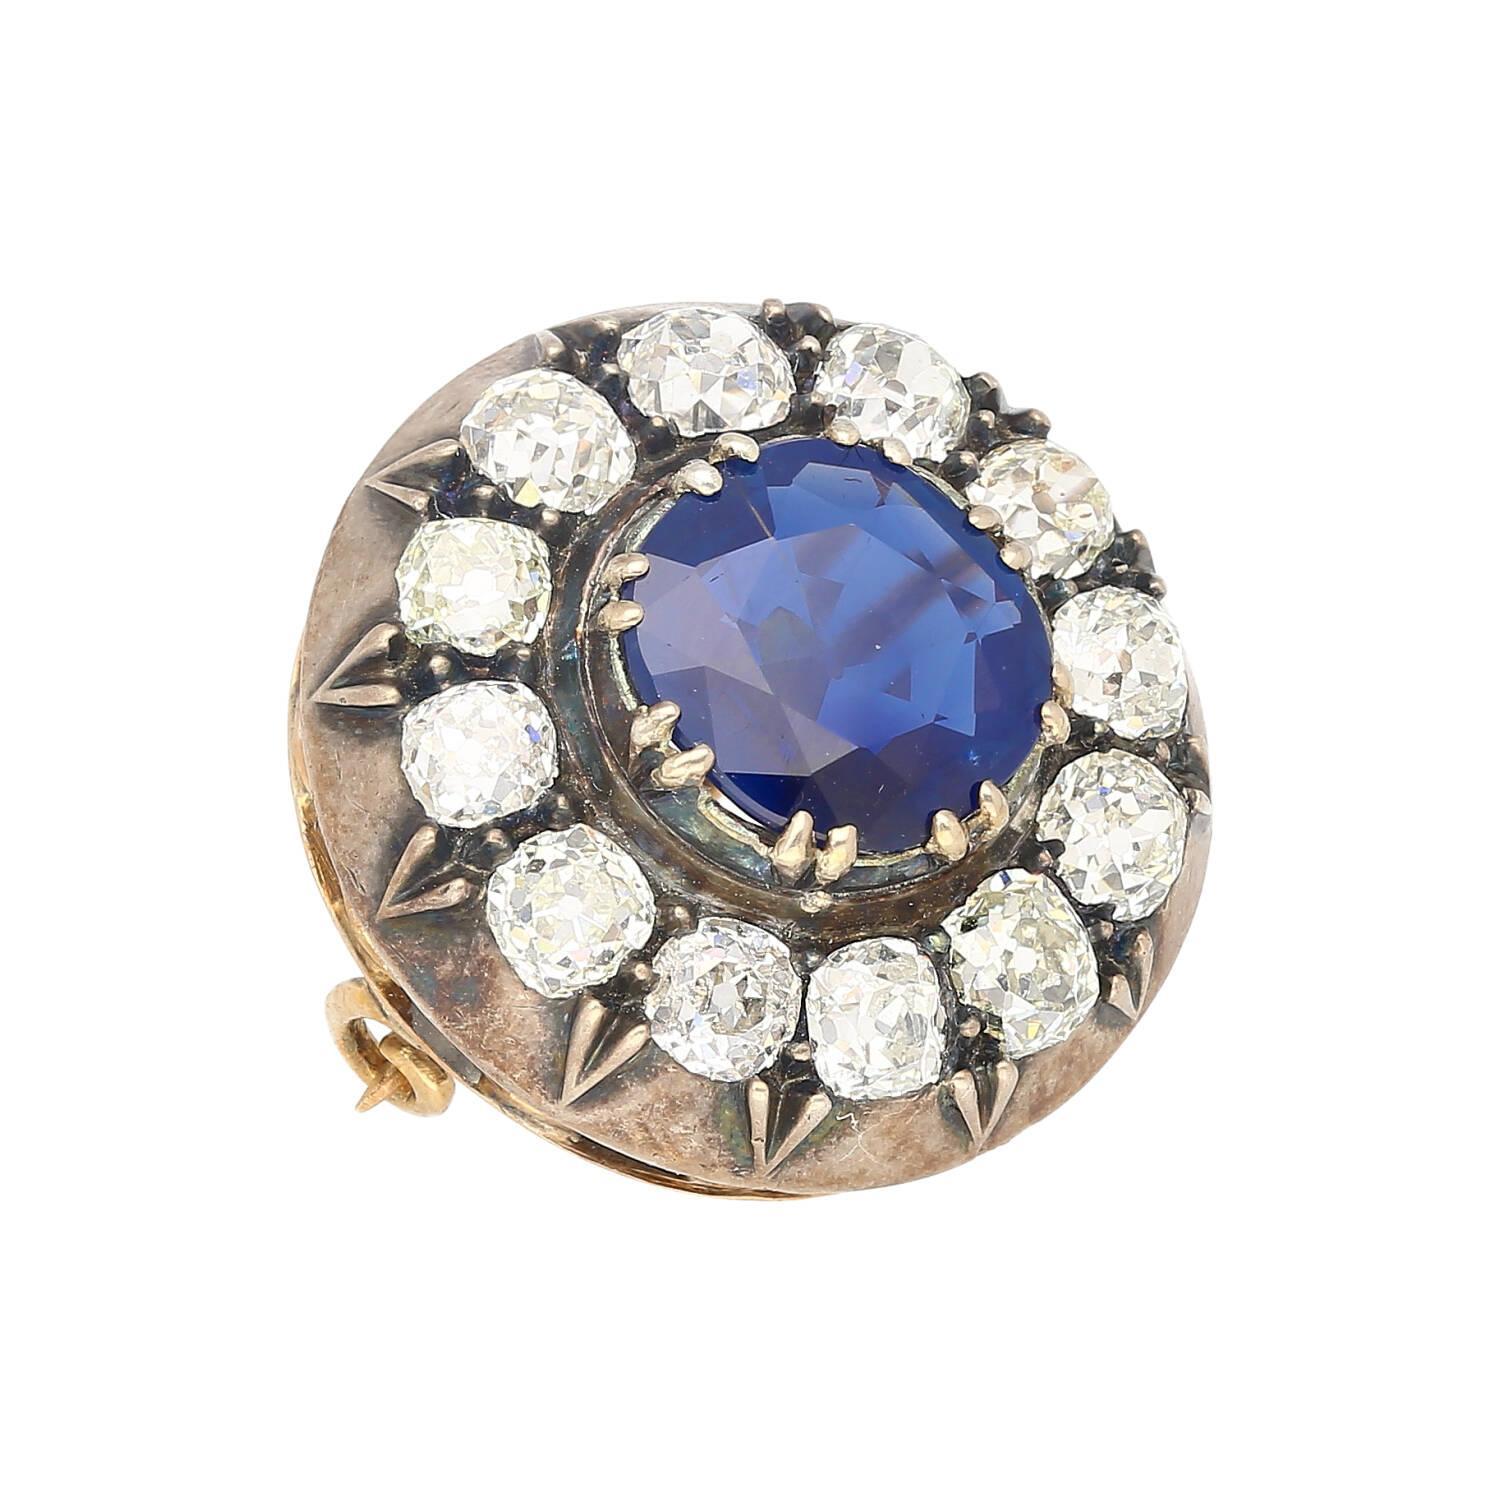 Vintage Silver & 9K Gold Brooch with No Heat 3.82 Carat Cushion Sapphire Brooch & Sapphire 
 
Item Details:
- Type: Pin/Brooch 
- Metal: Silver, 9K Gold 
- Weight: 5.53 grams 
- Setting: Prong 
_______________________

Center Stone Details:
-